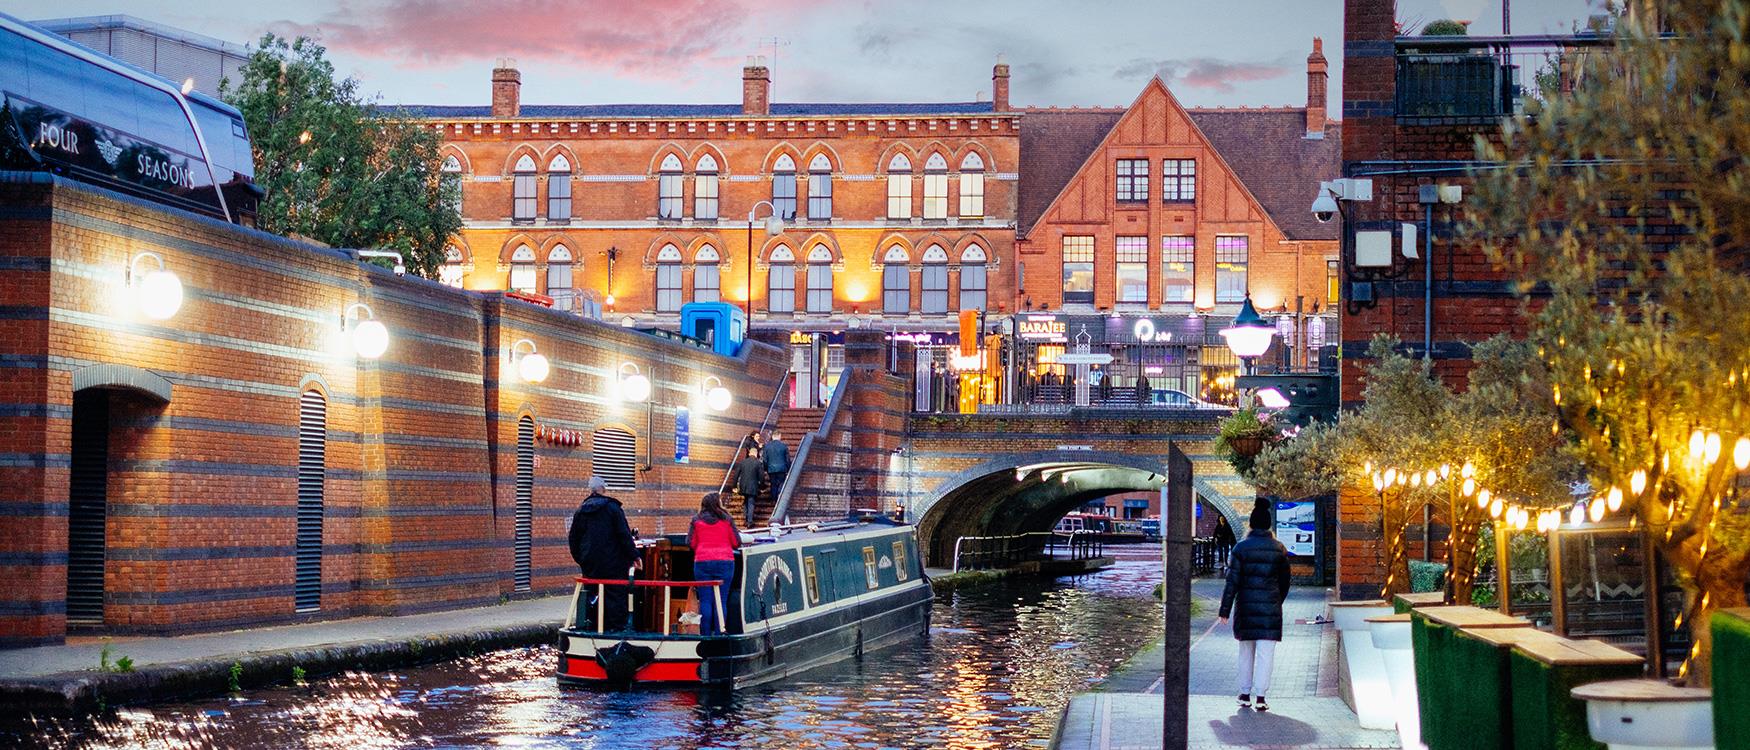 Things to do in Birmingham - Birmingham's Canalside in Brindleyplace